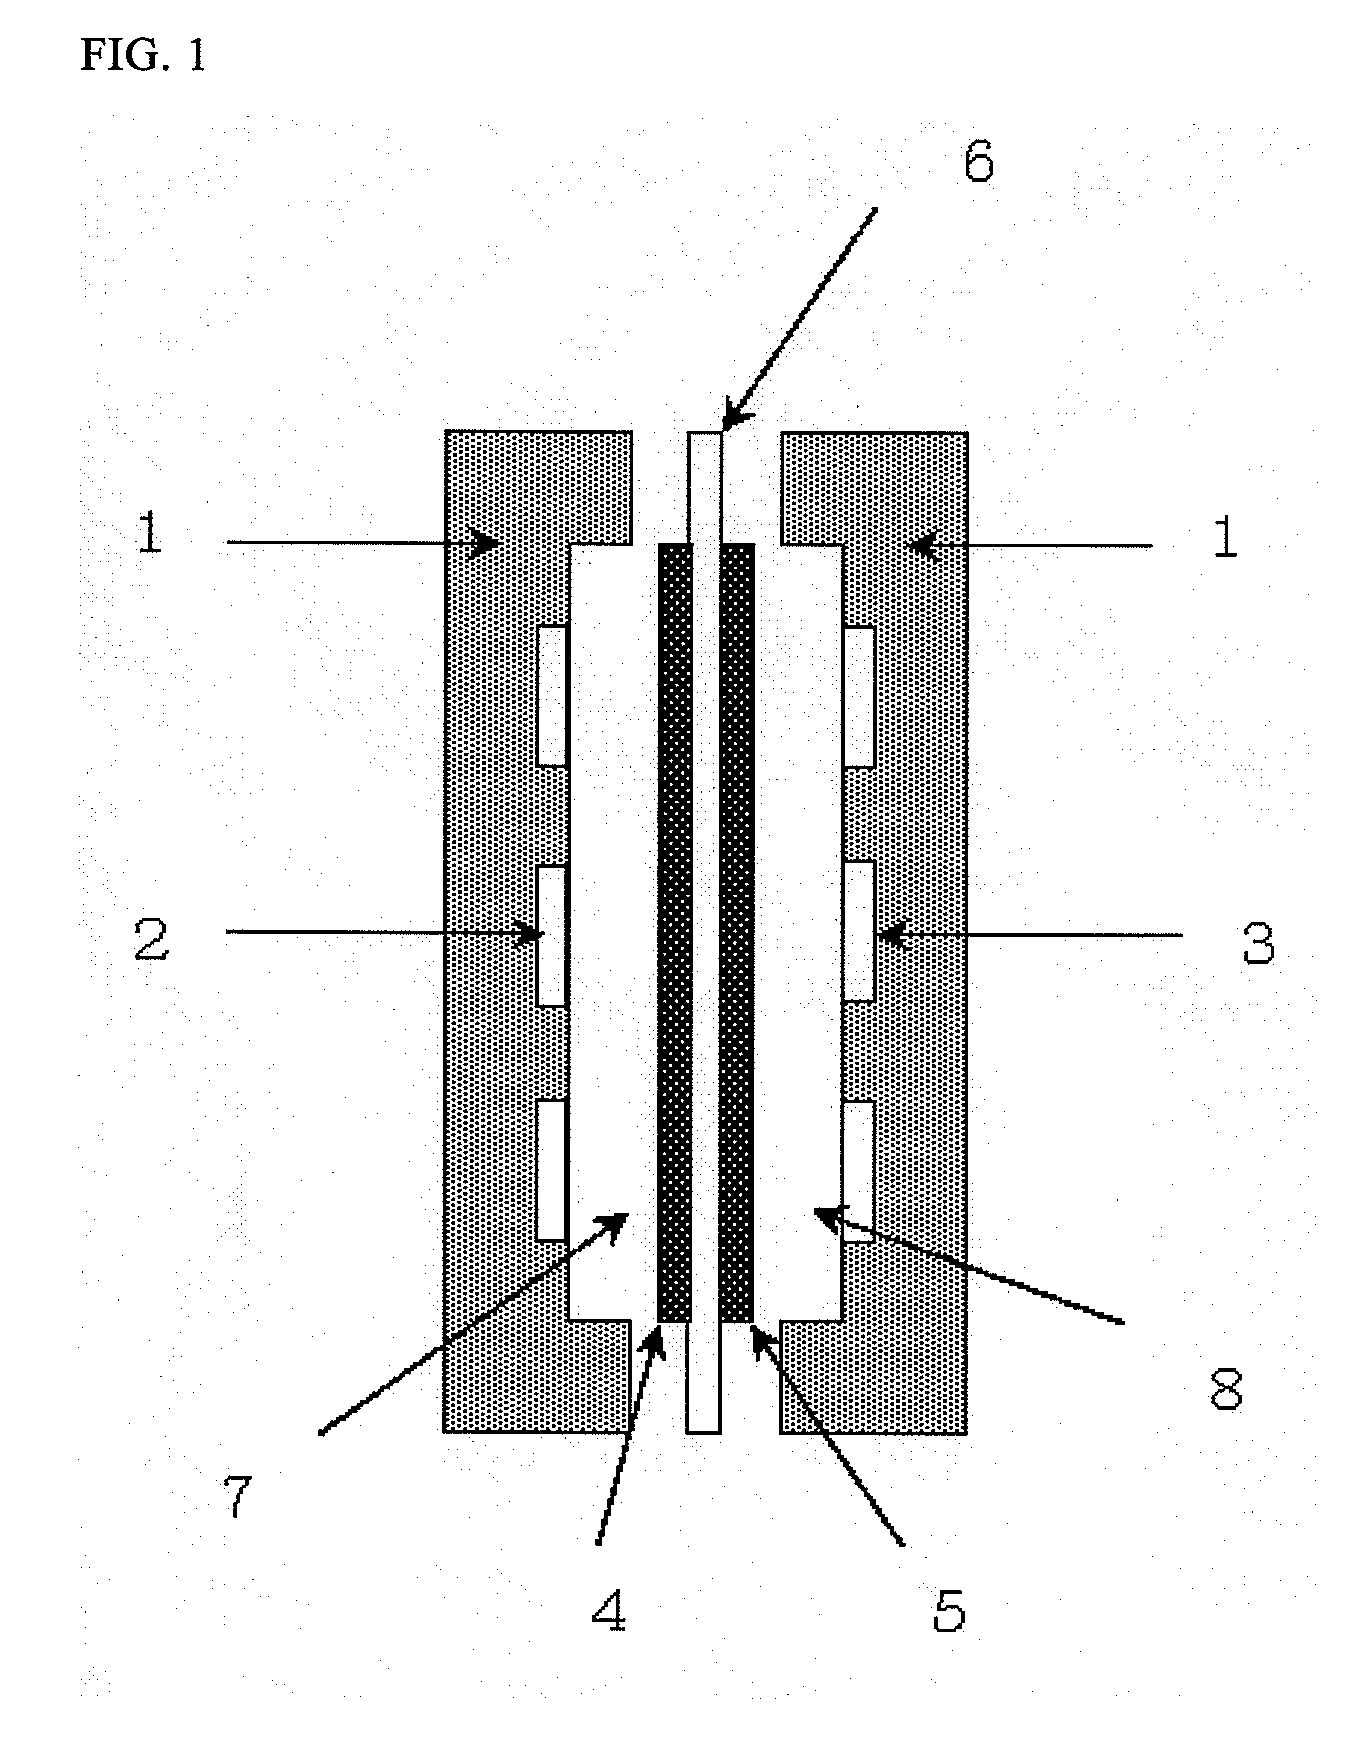 Operating Method of Anion-Exchange Membrane-Type Fuel Cell